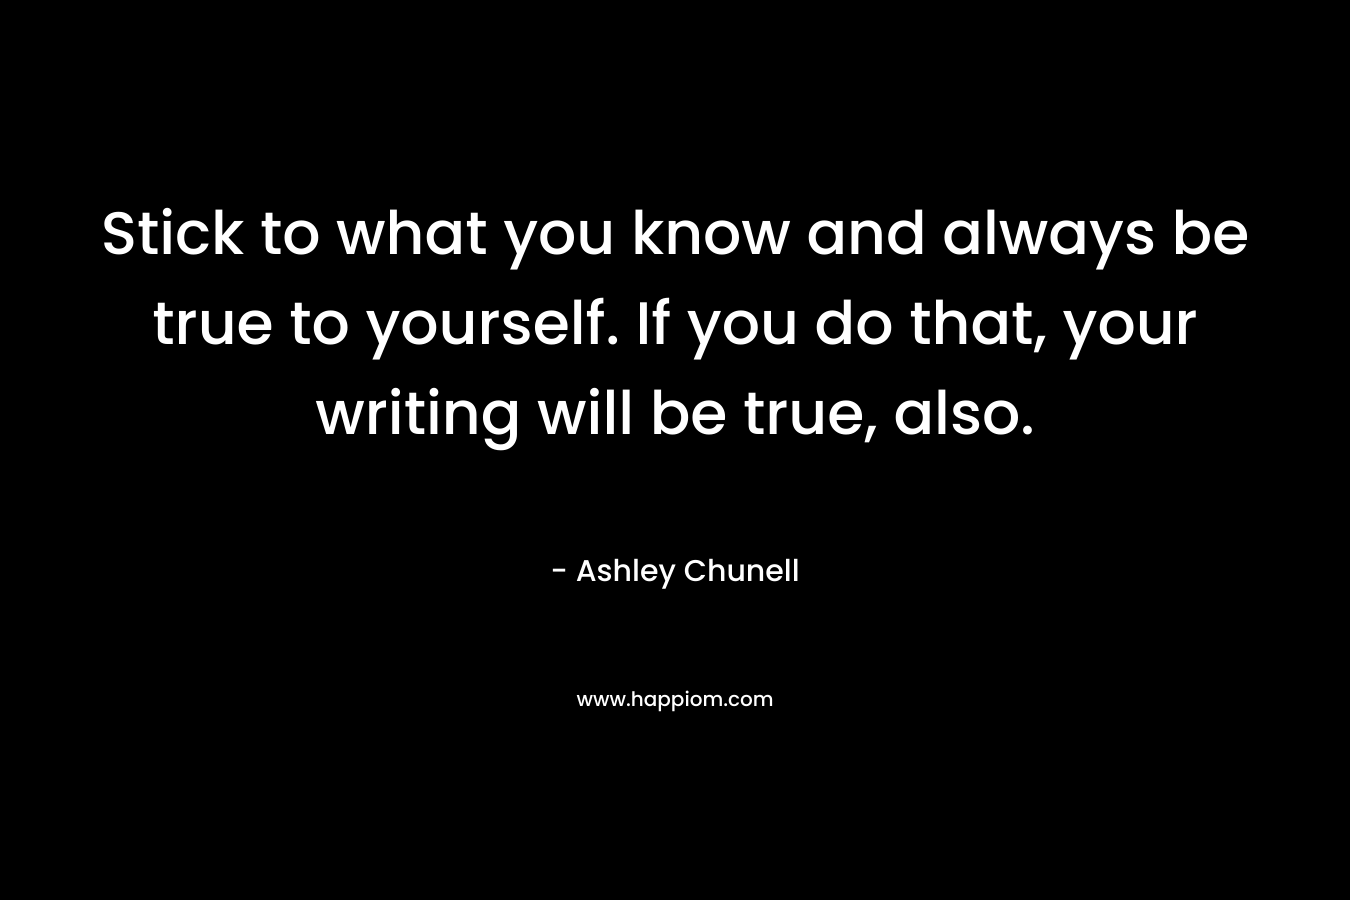 Stick to what you know and always be true to yourself. If you do that, your writing will be true, also. – Ashley Chunell